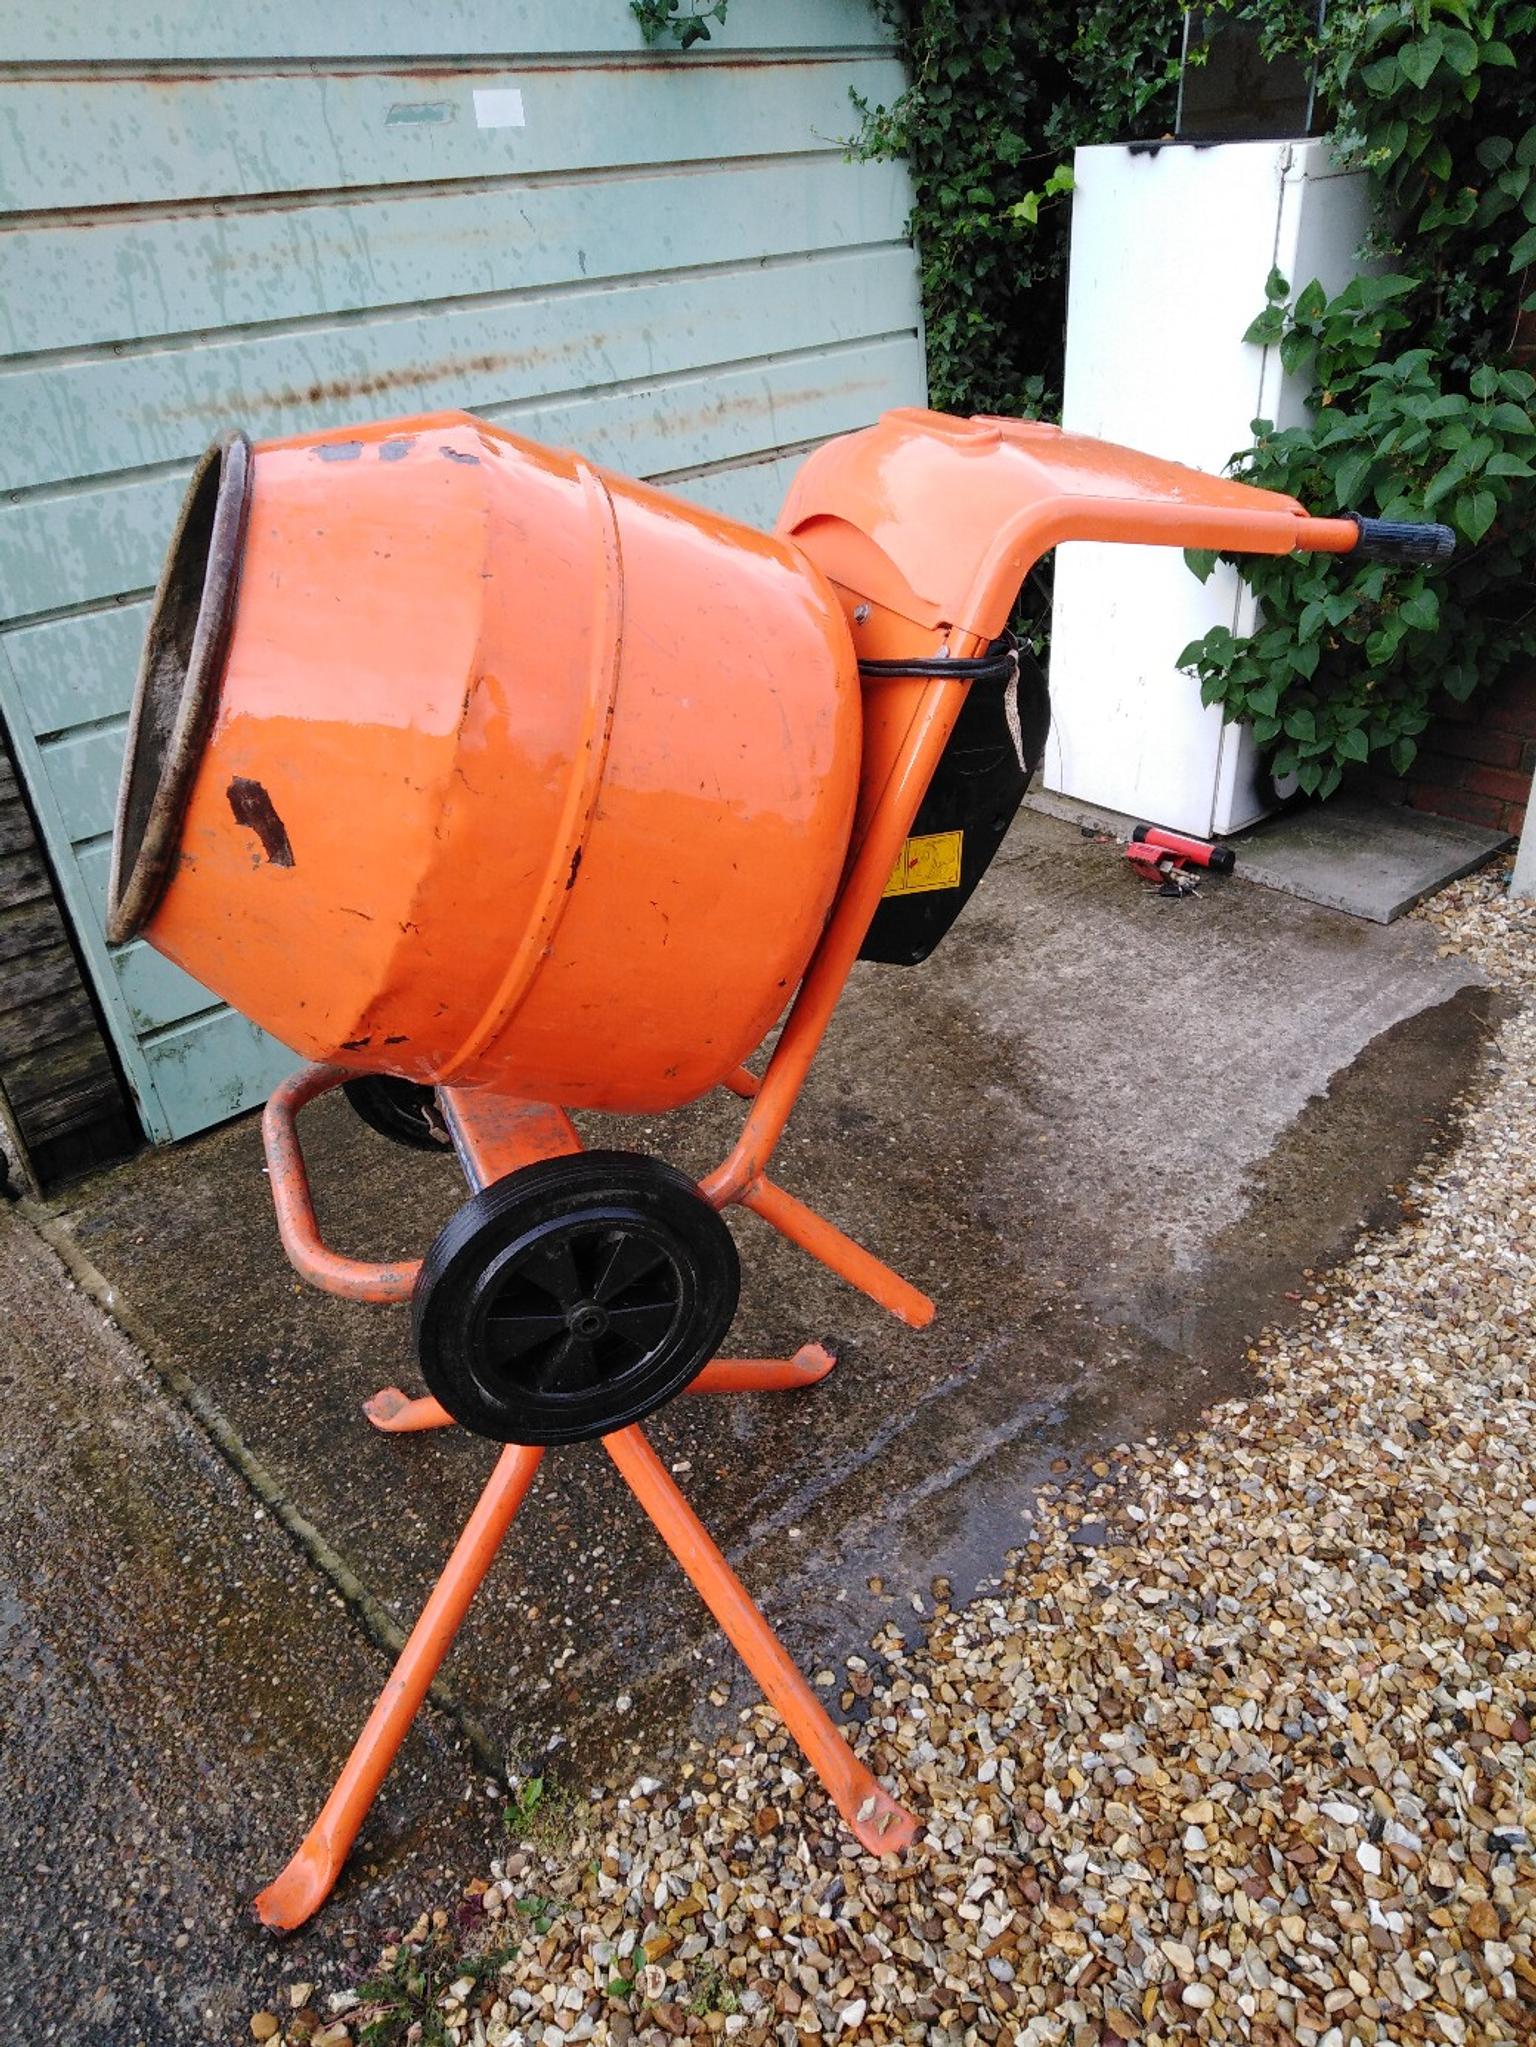 belle cement mixer in Doncaster for £200.00 for sale | Shpock